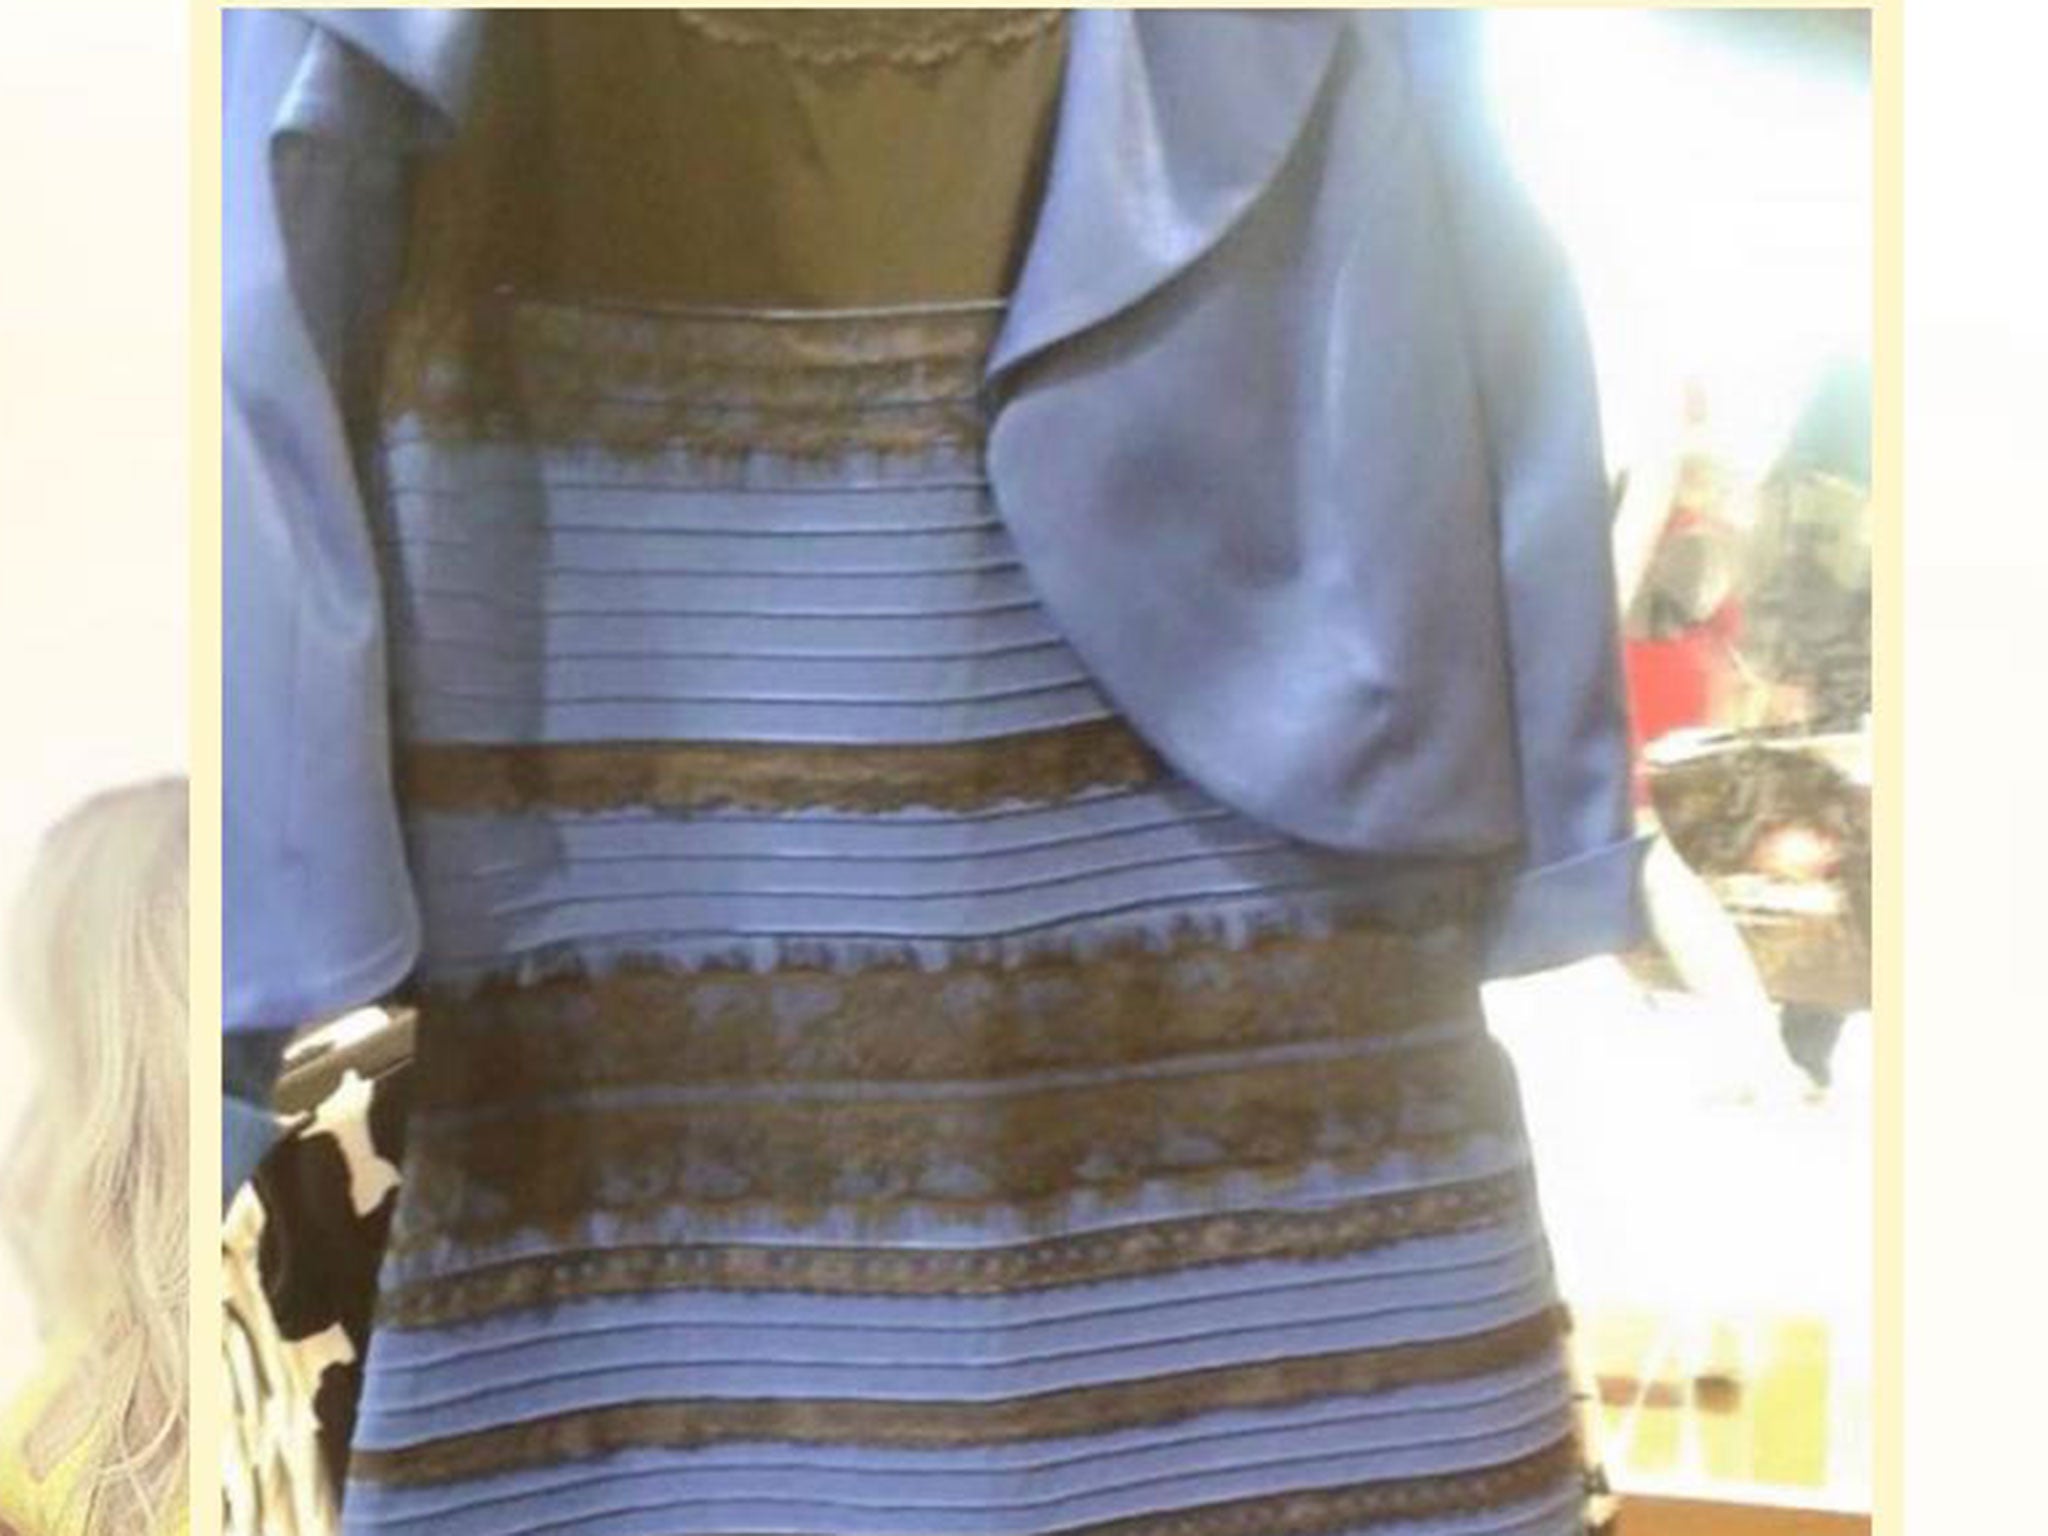 gold and blue dress illusion